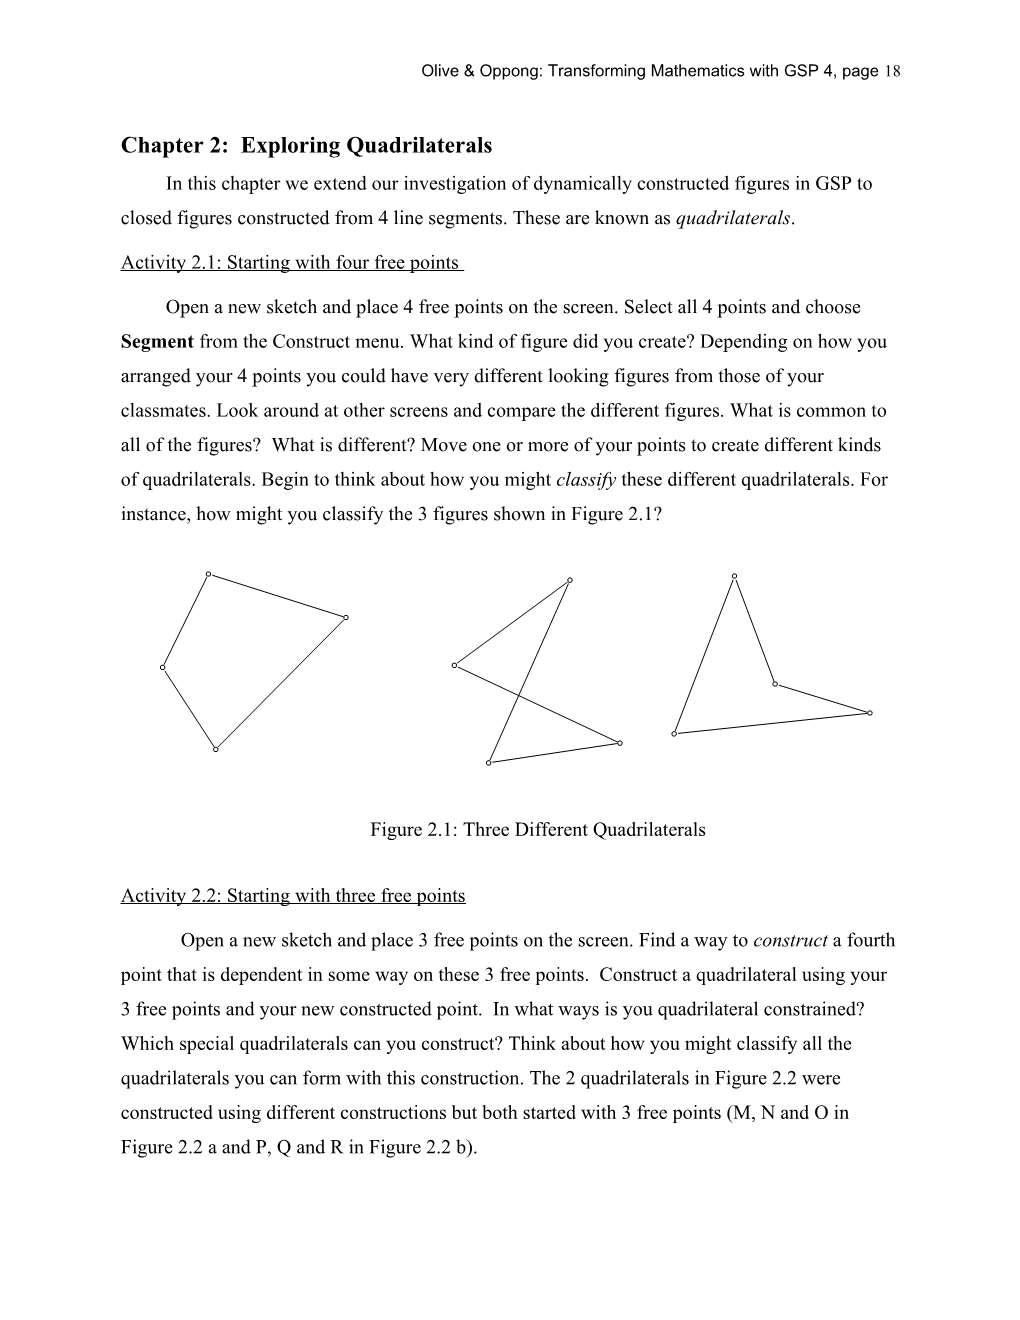 Chapter 3: Exploring Quadrilaterals and Other Polygons